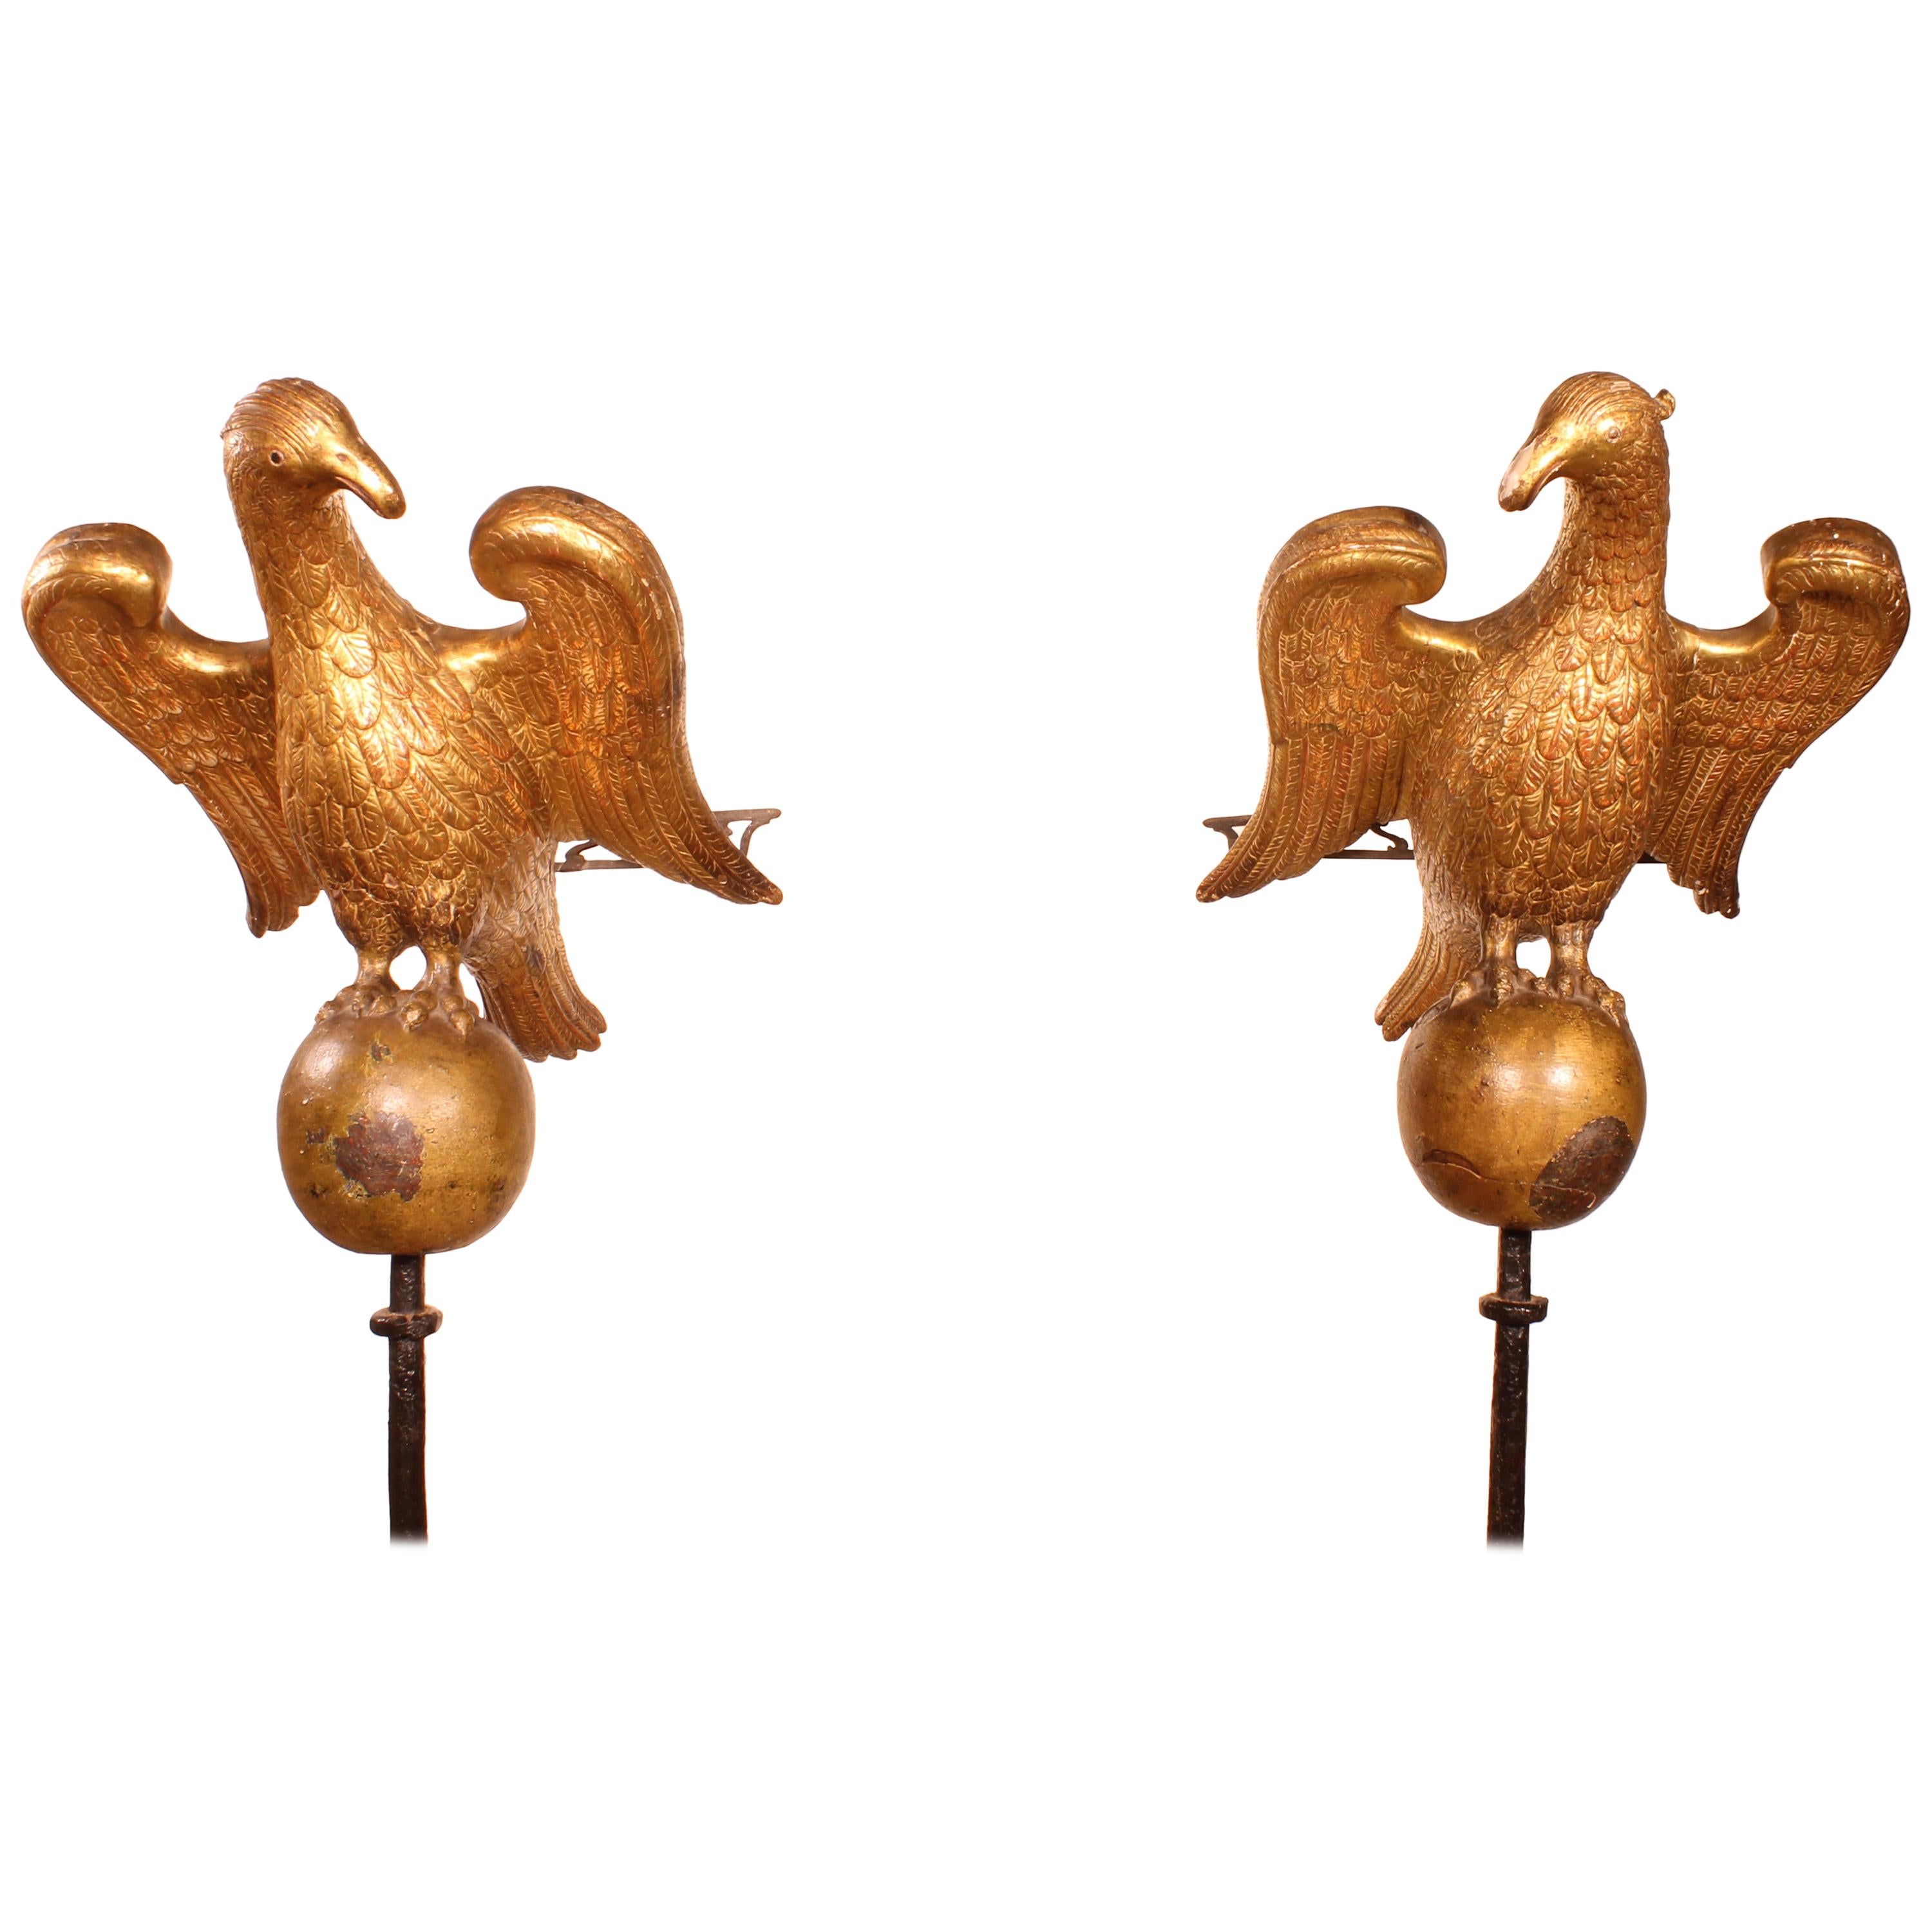 Pair of Eagles 16th Century from North Italy Church Lectern